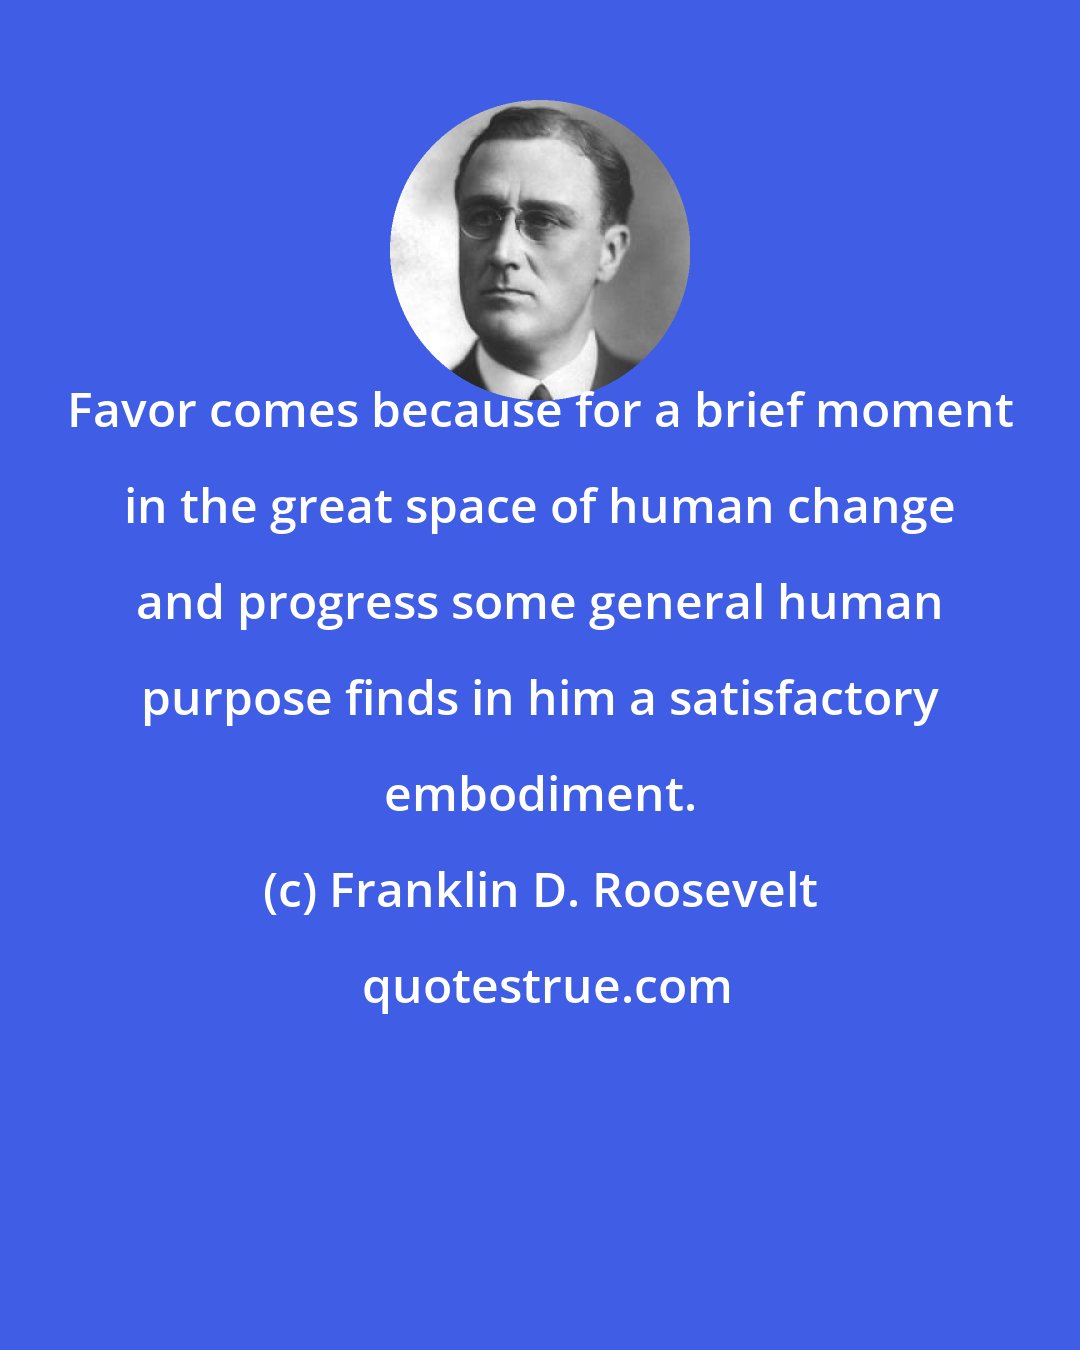 Franklin D. Roosevelt: Favor comes because for a brief moment in the great space of human change and progress some general human purpose finds in him a satisfactory embodiment.